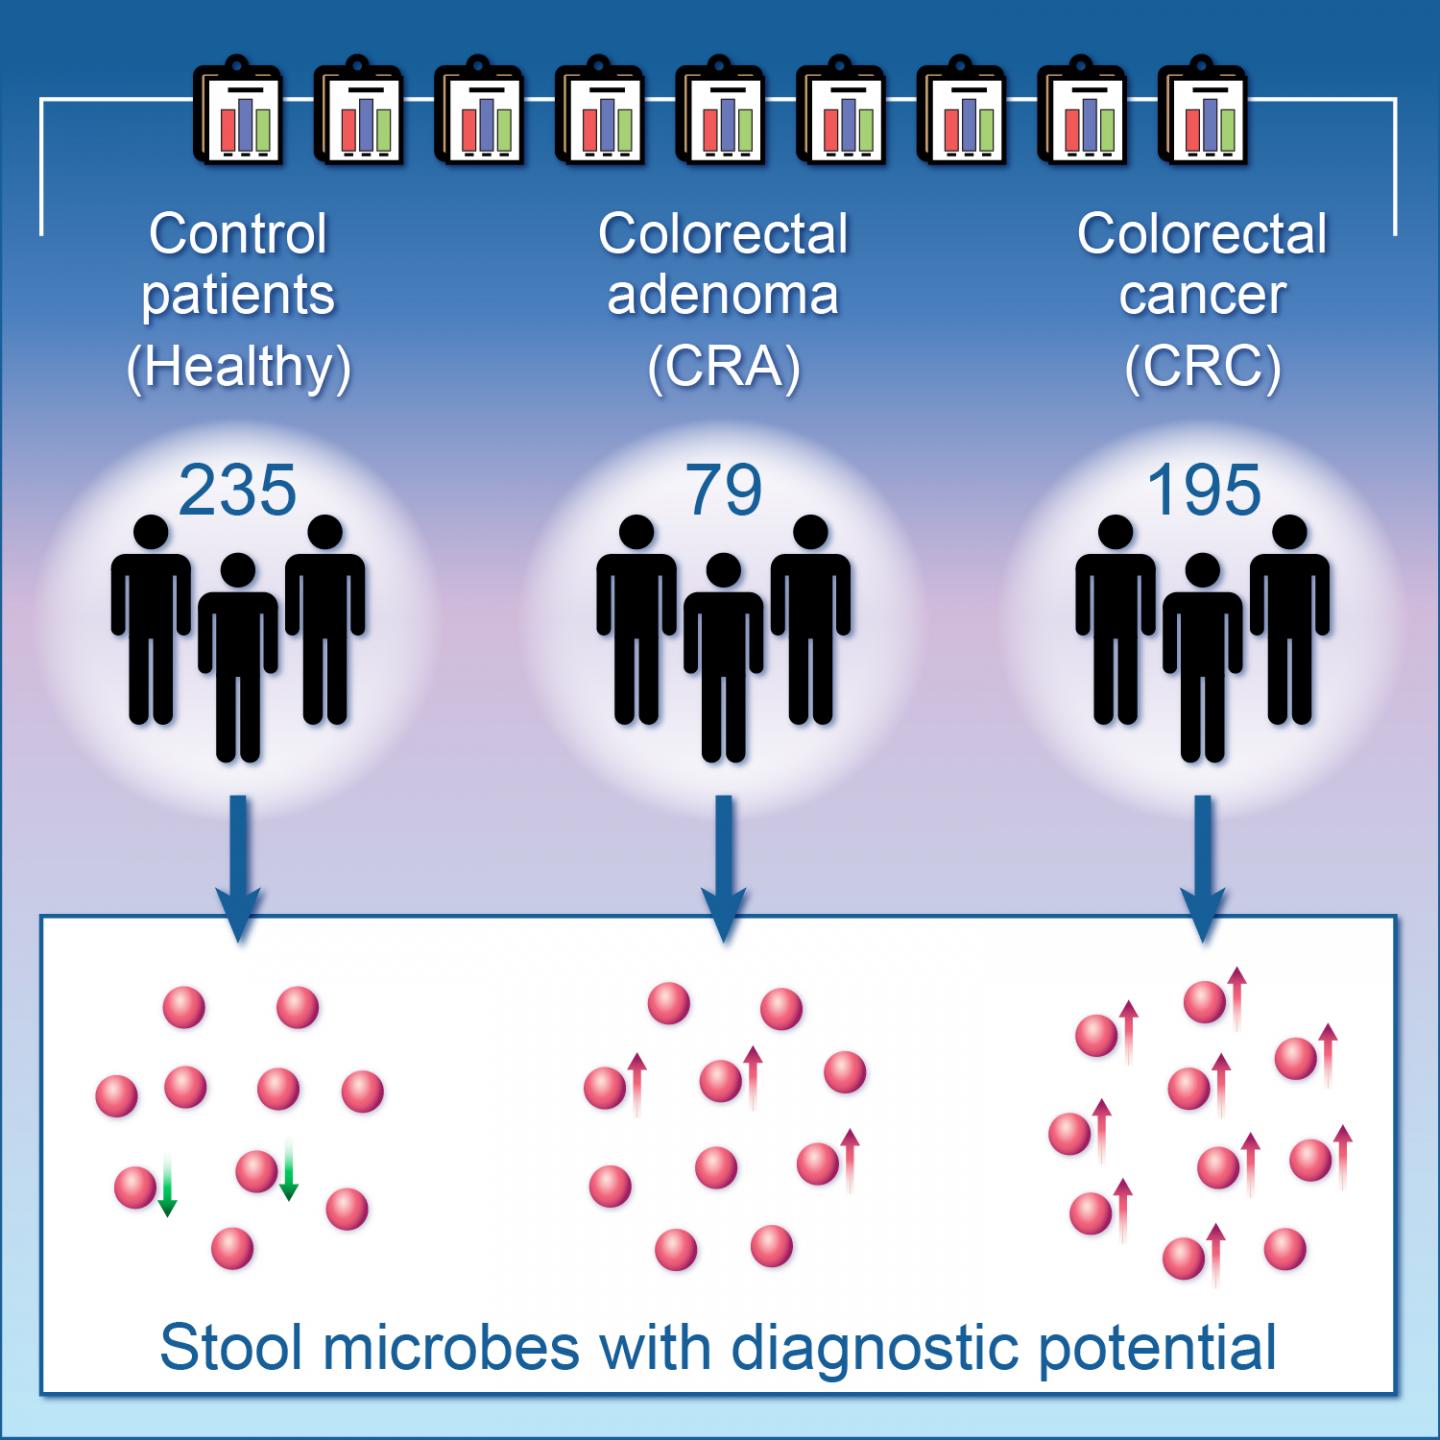 Stool Microbes May Help Diagnose Colorectal Cancer